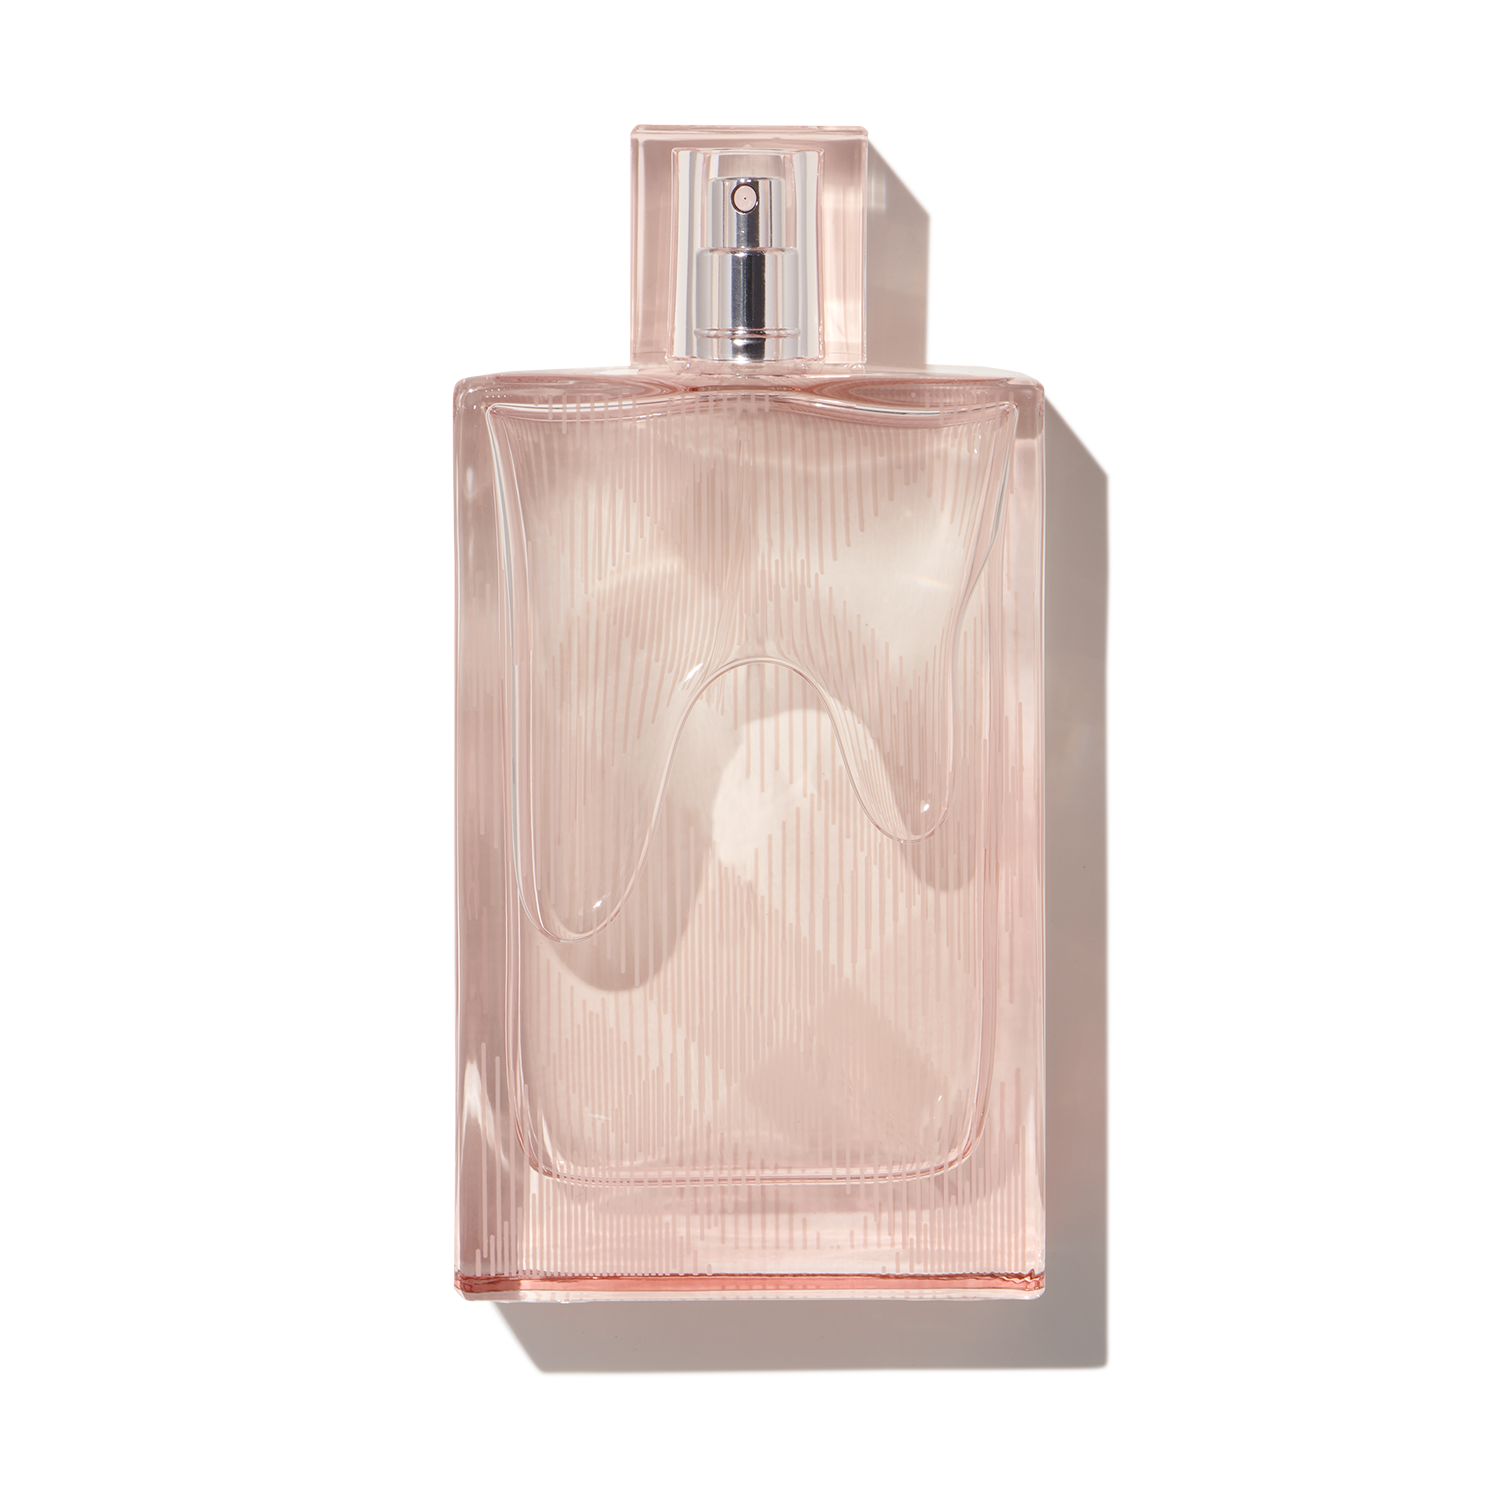 Get Burberry Brit Sheer Scentbird for $16.95 at